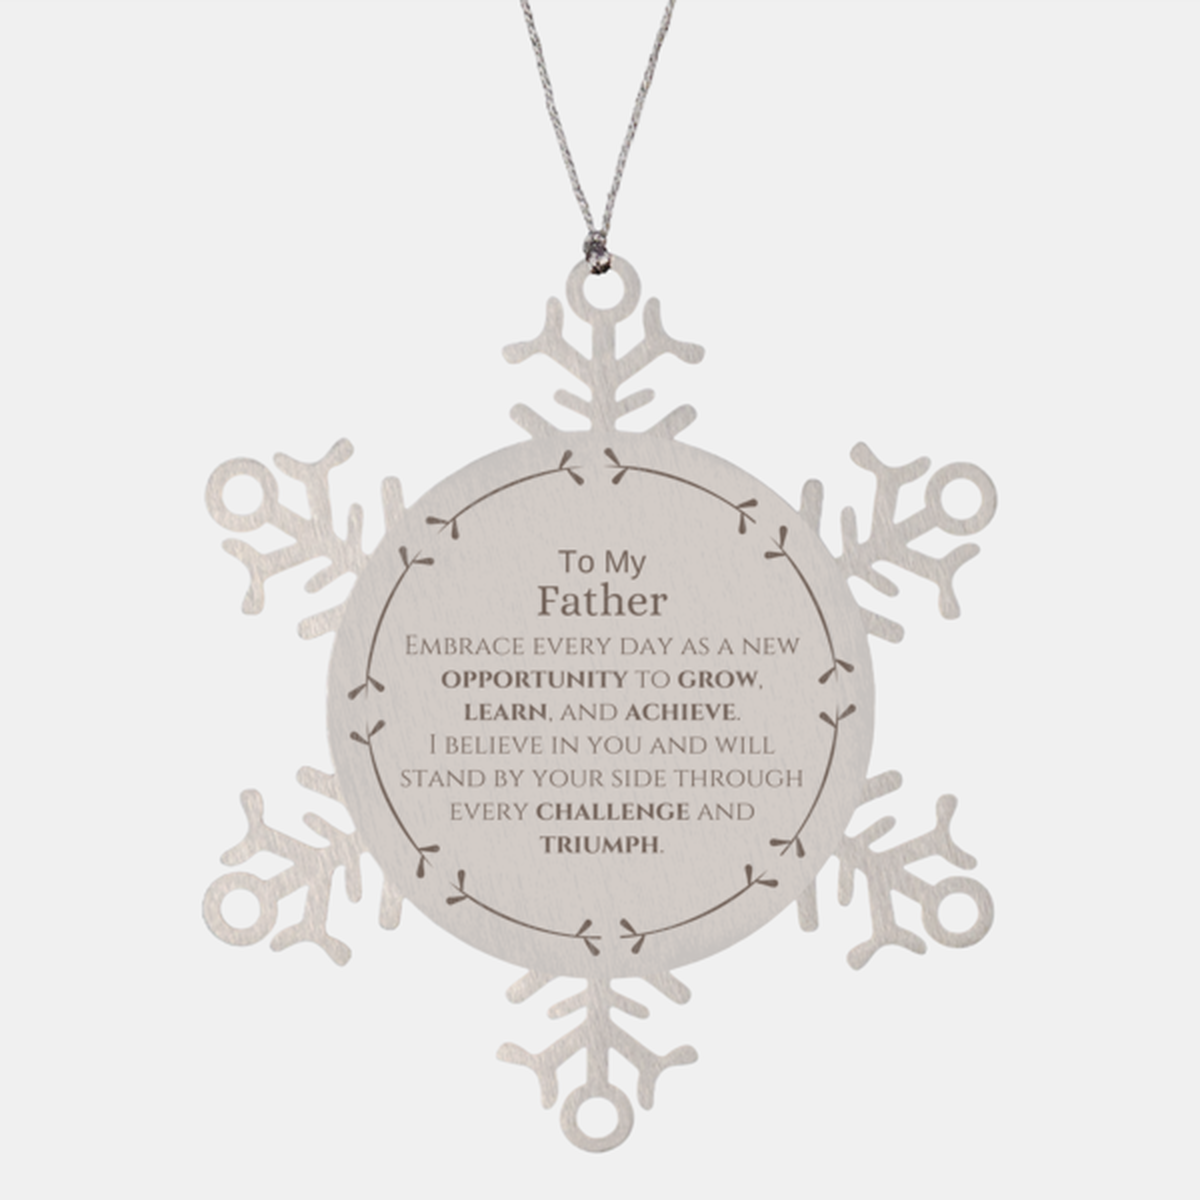 To My Father Gifts, I believe in you and will stand by your side, Inspirational Snowflake Ornament For Father, Birthday Christmas Motivational Father Gifts